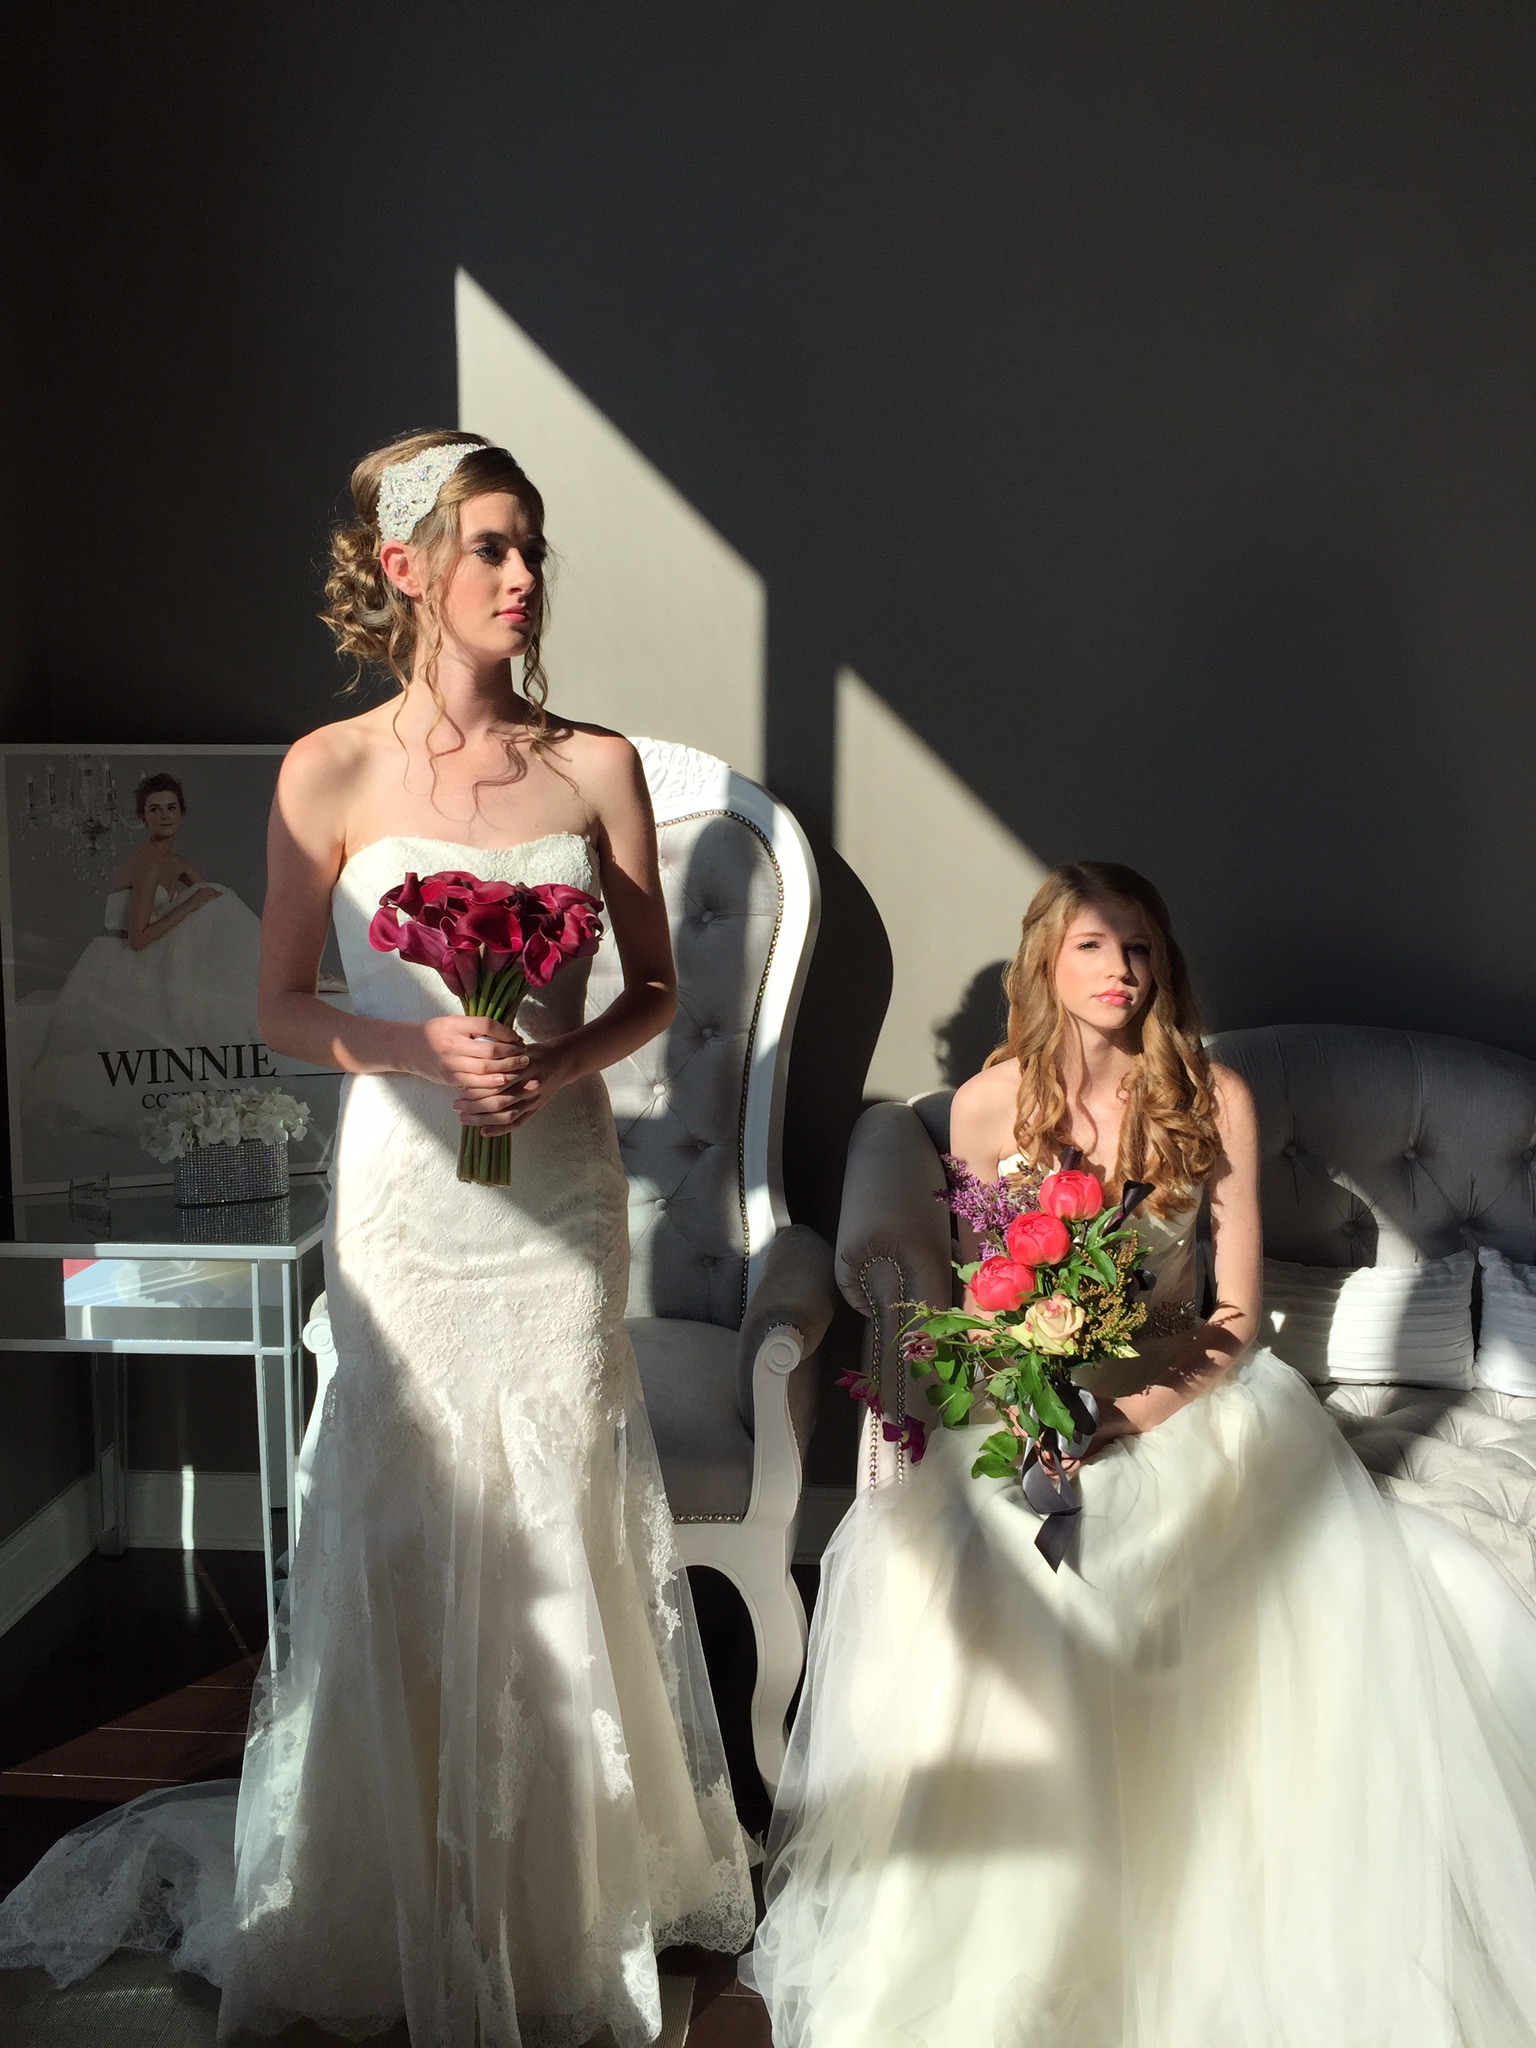 Two women in wedding dresses posing for a picture.